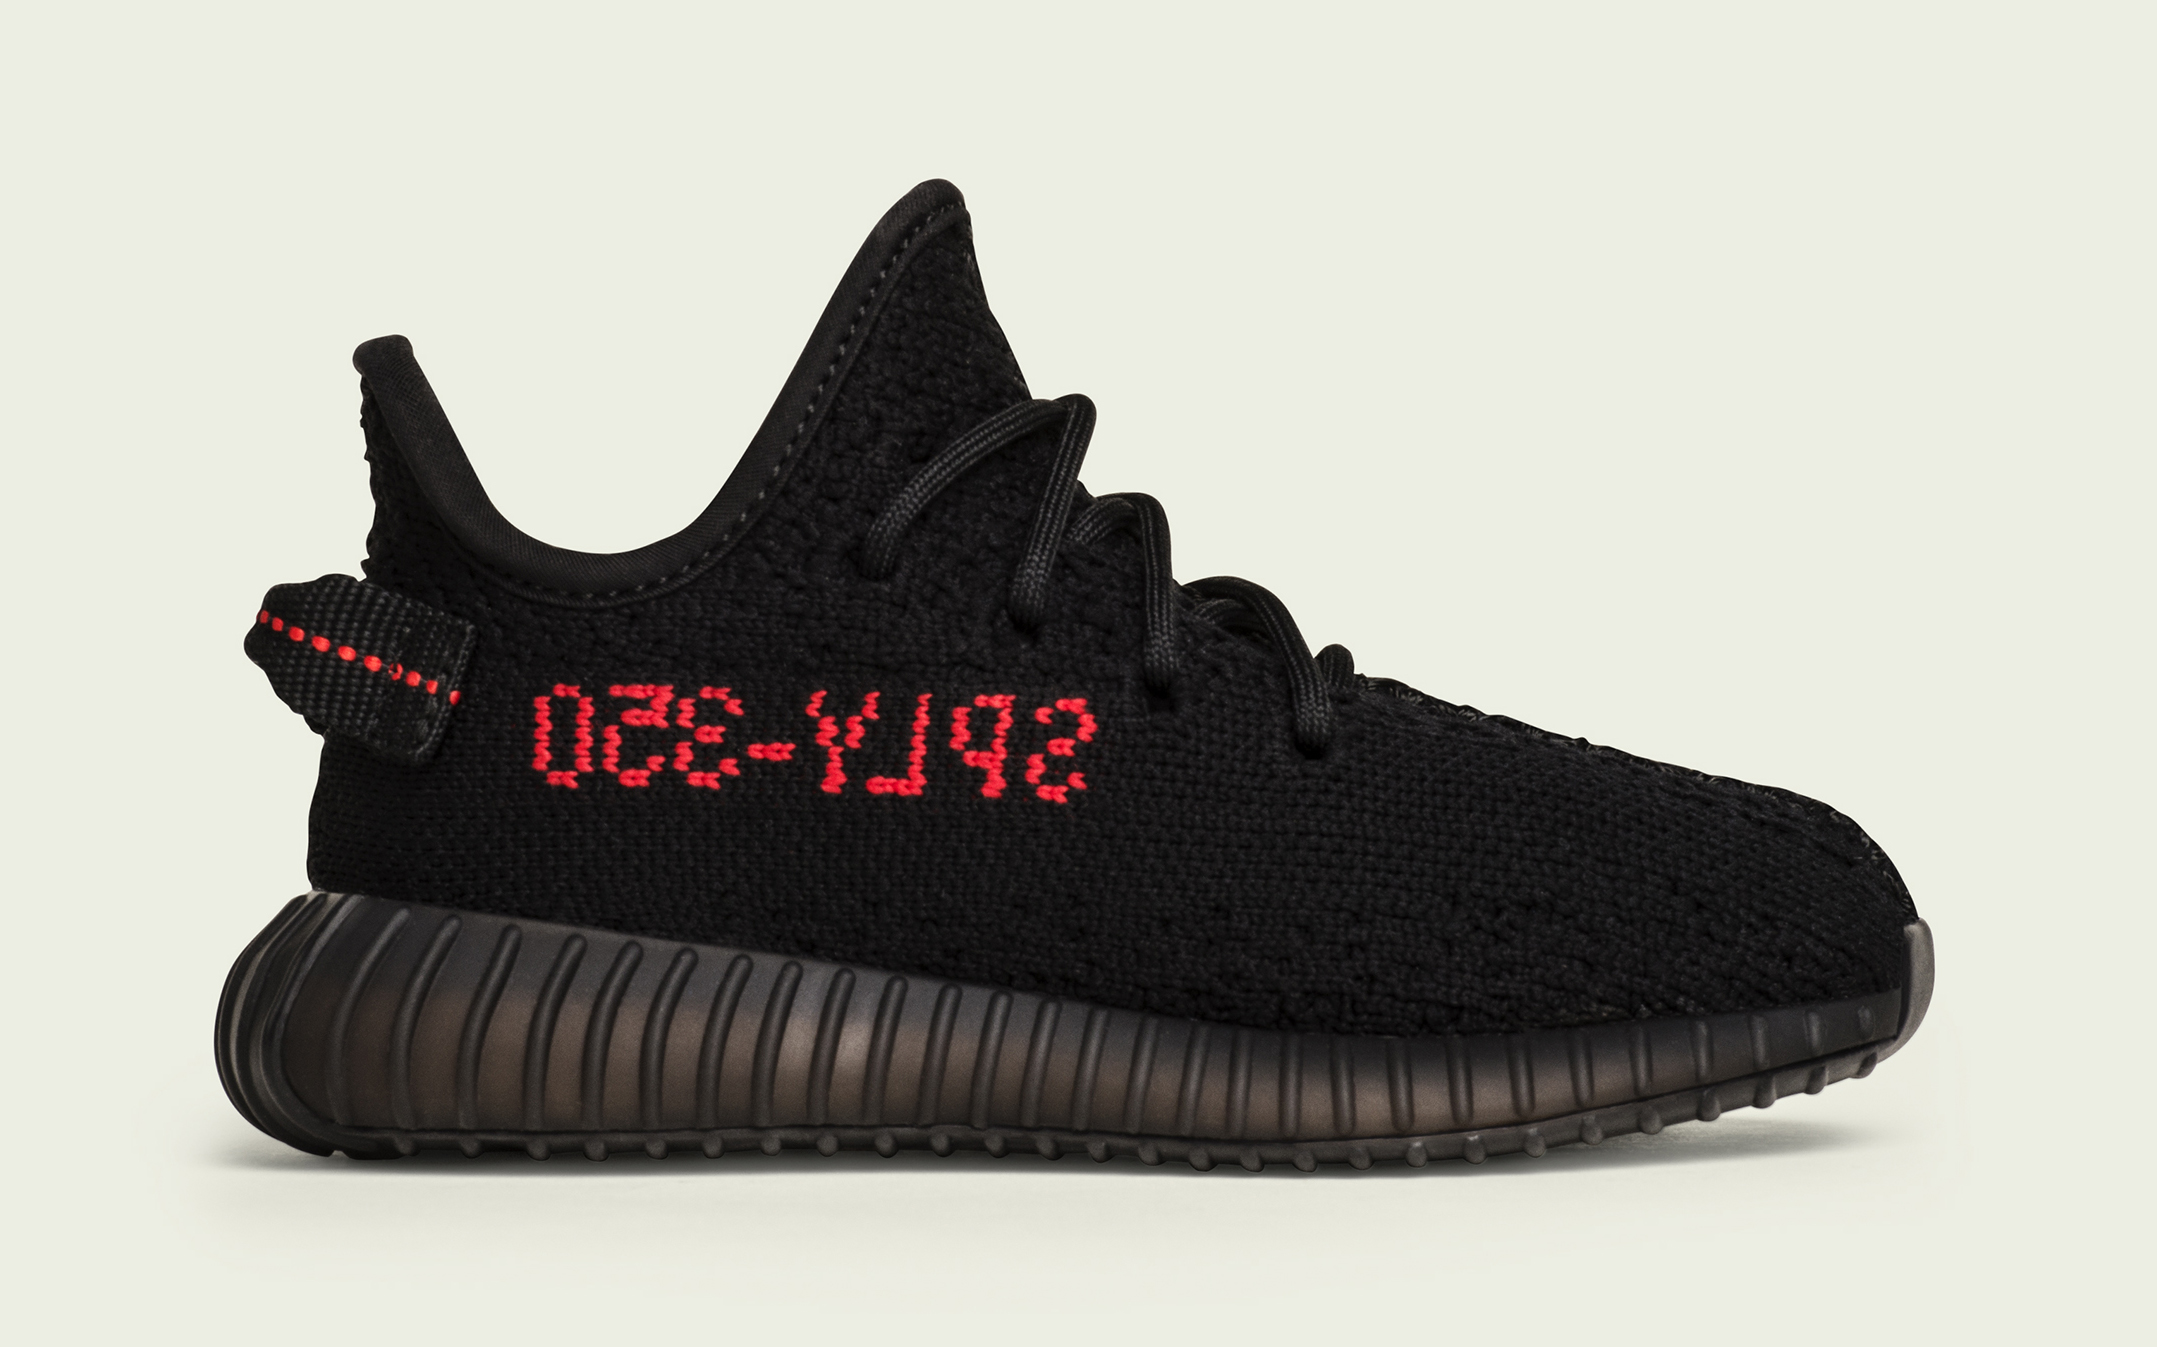 Adidas Yeezy Boost 350 V2 'Core Black/Red